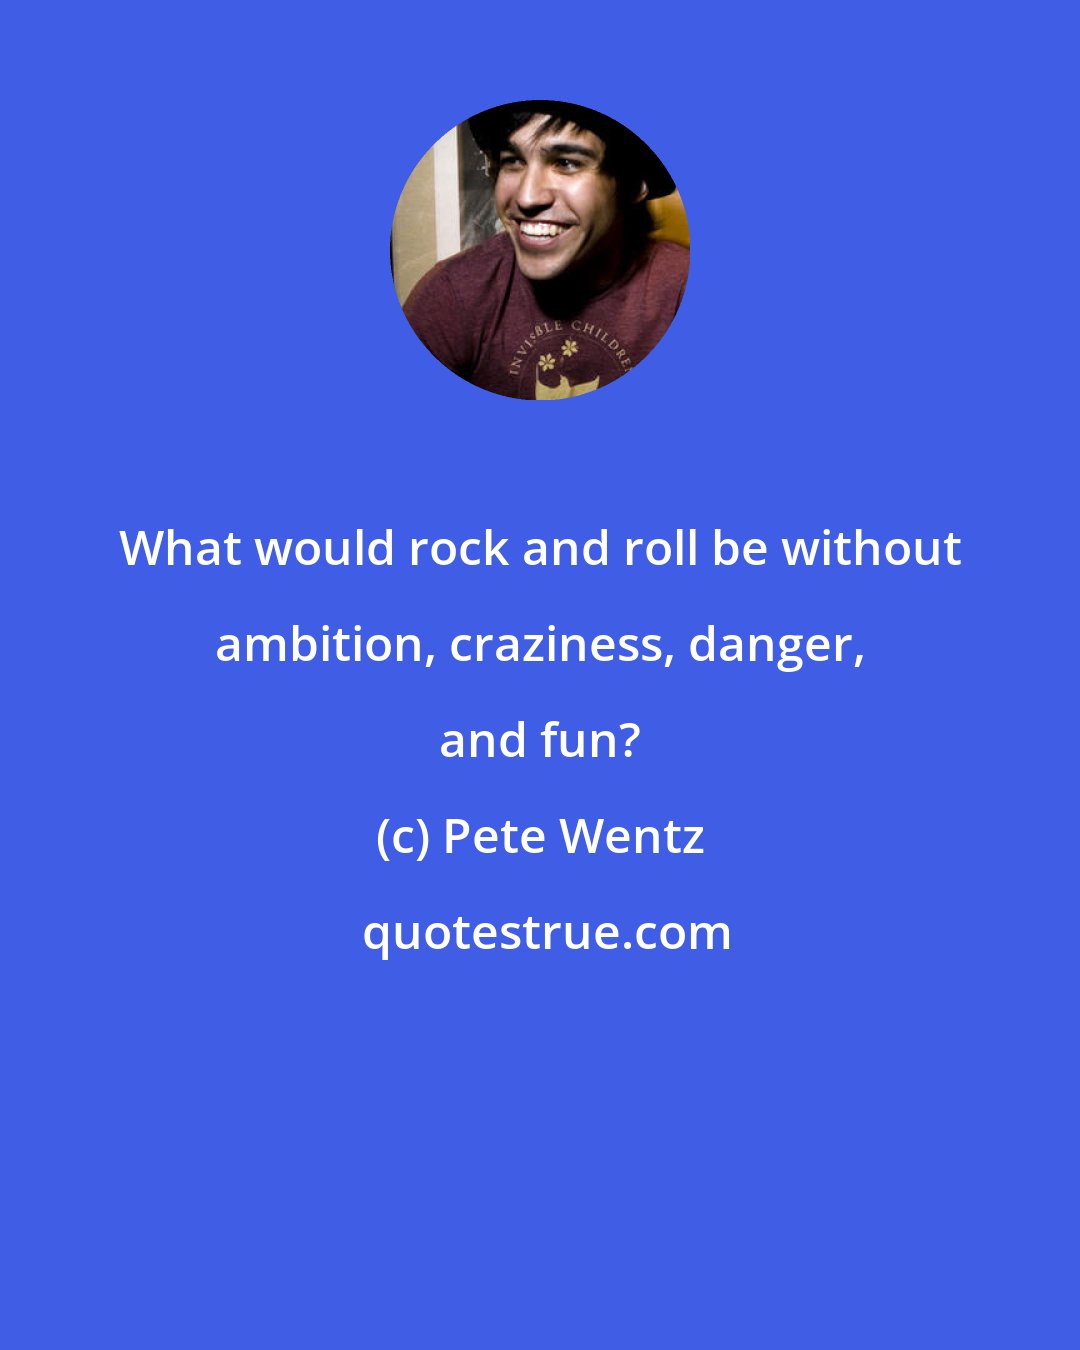 Pete Wentz: What would rock and roll be without ambition, craziness, danger, and fun?